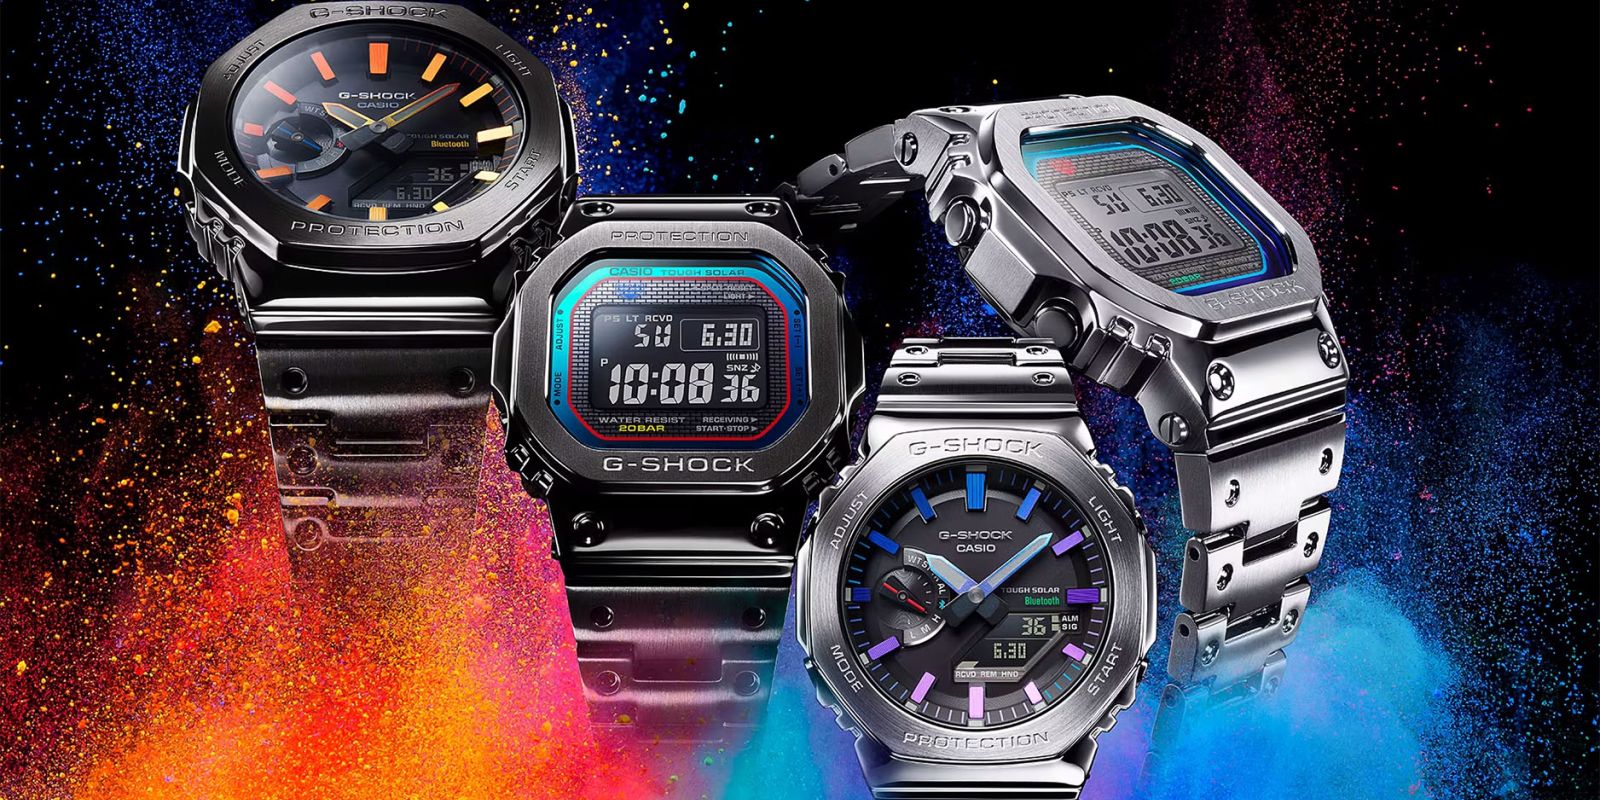 The new Casio G-Shock Full Metal watches with multi-coloured dials.